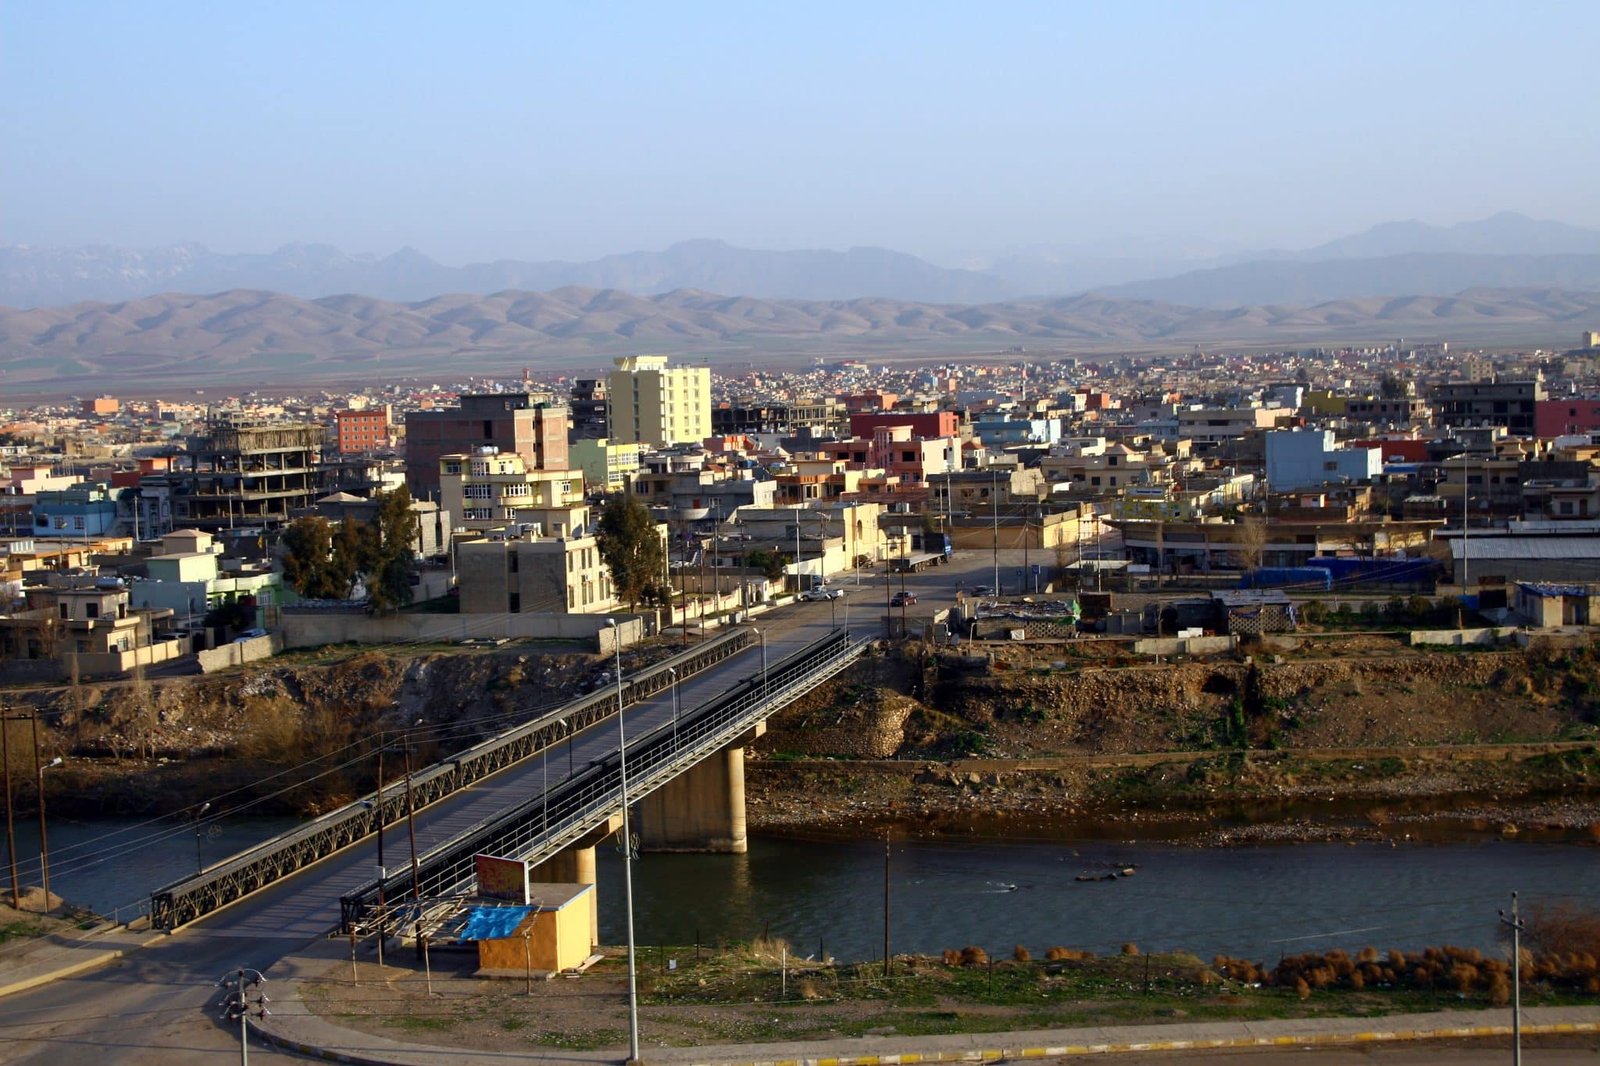 View of Zakho City